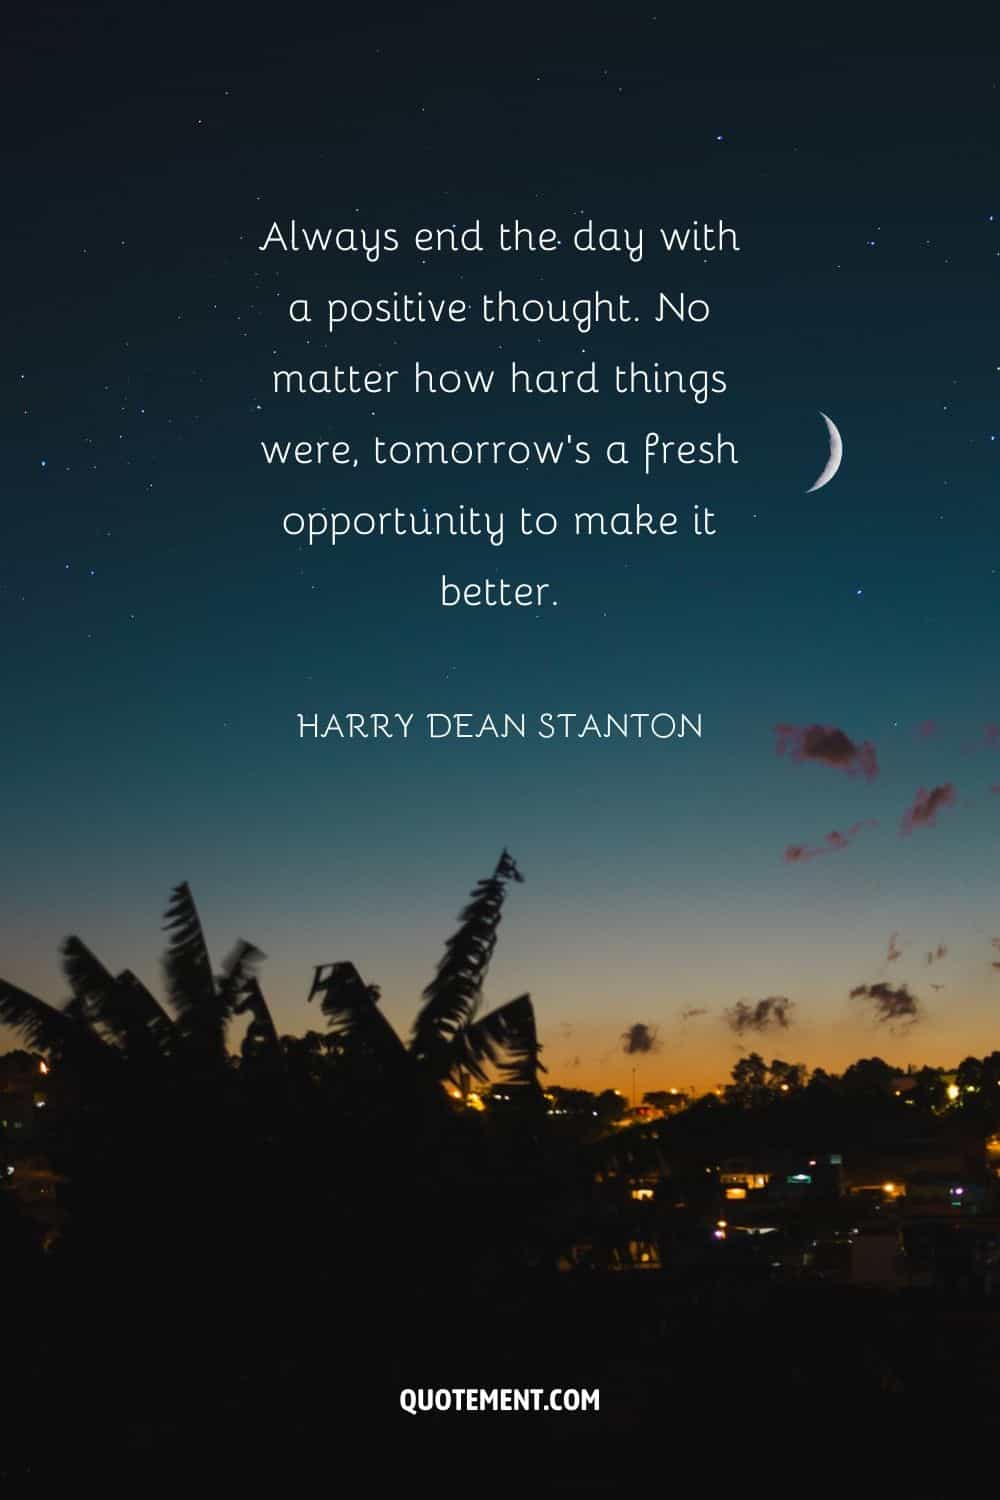 Always end the day with a positive thought